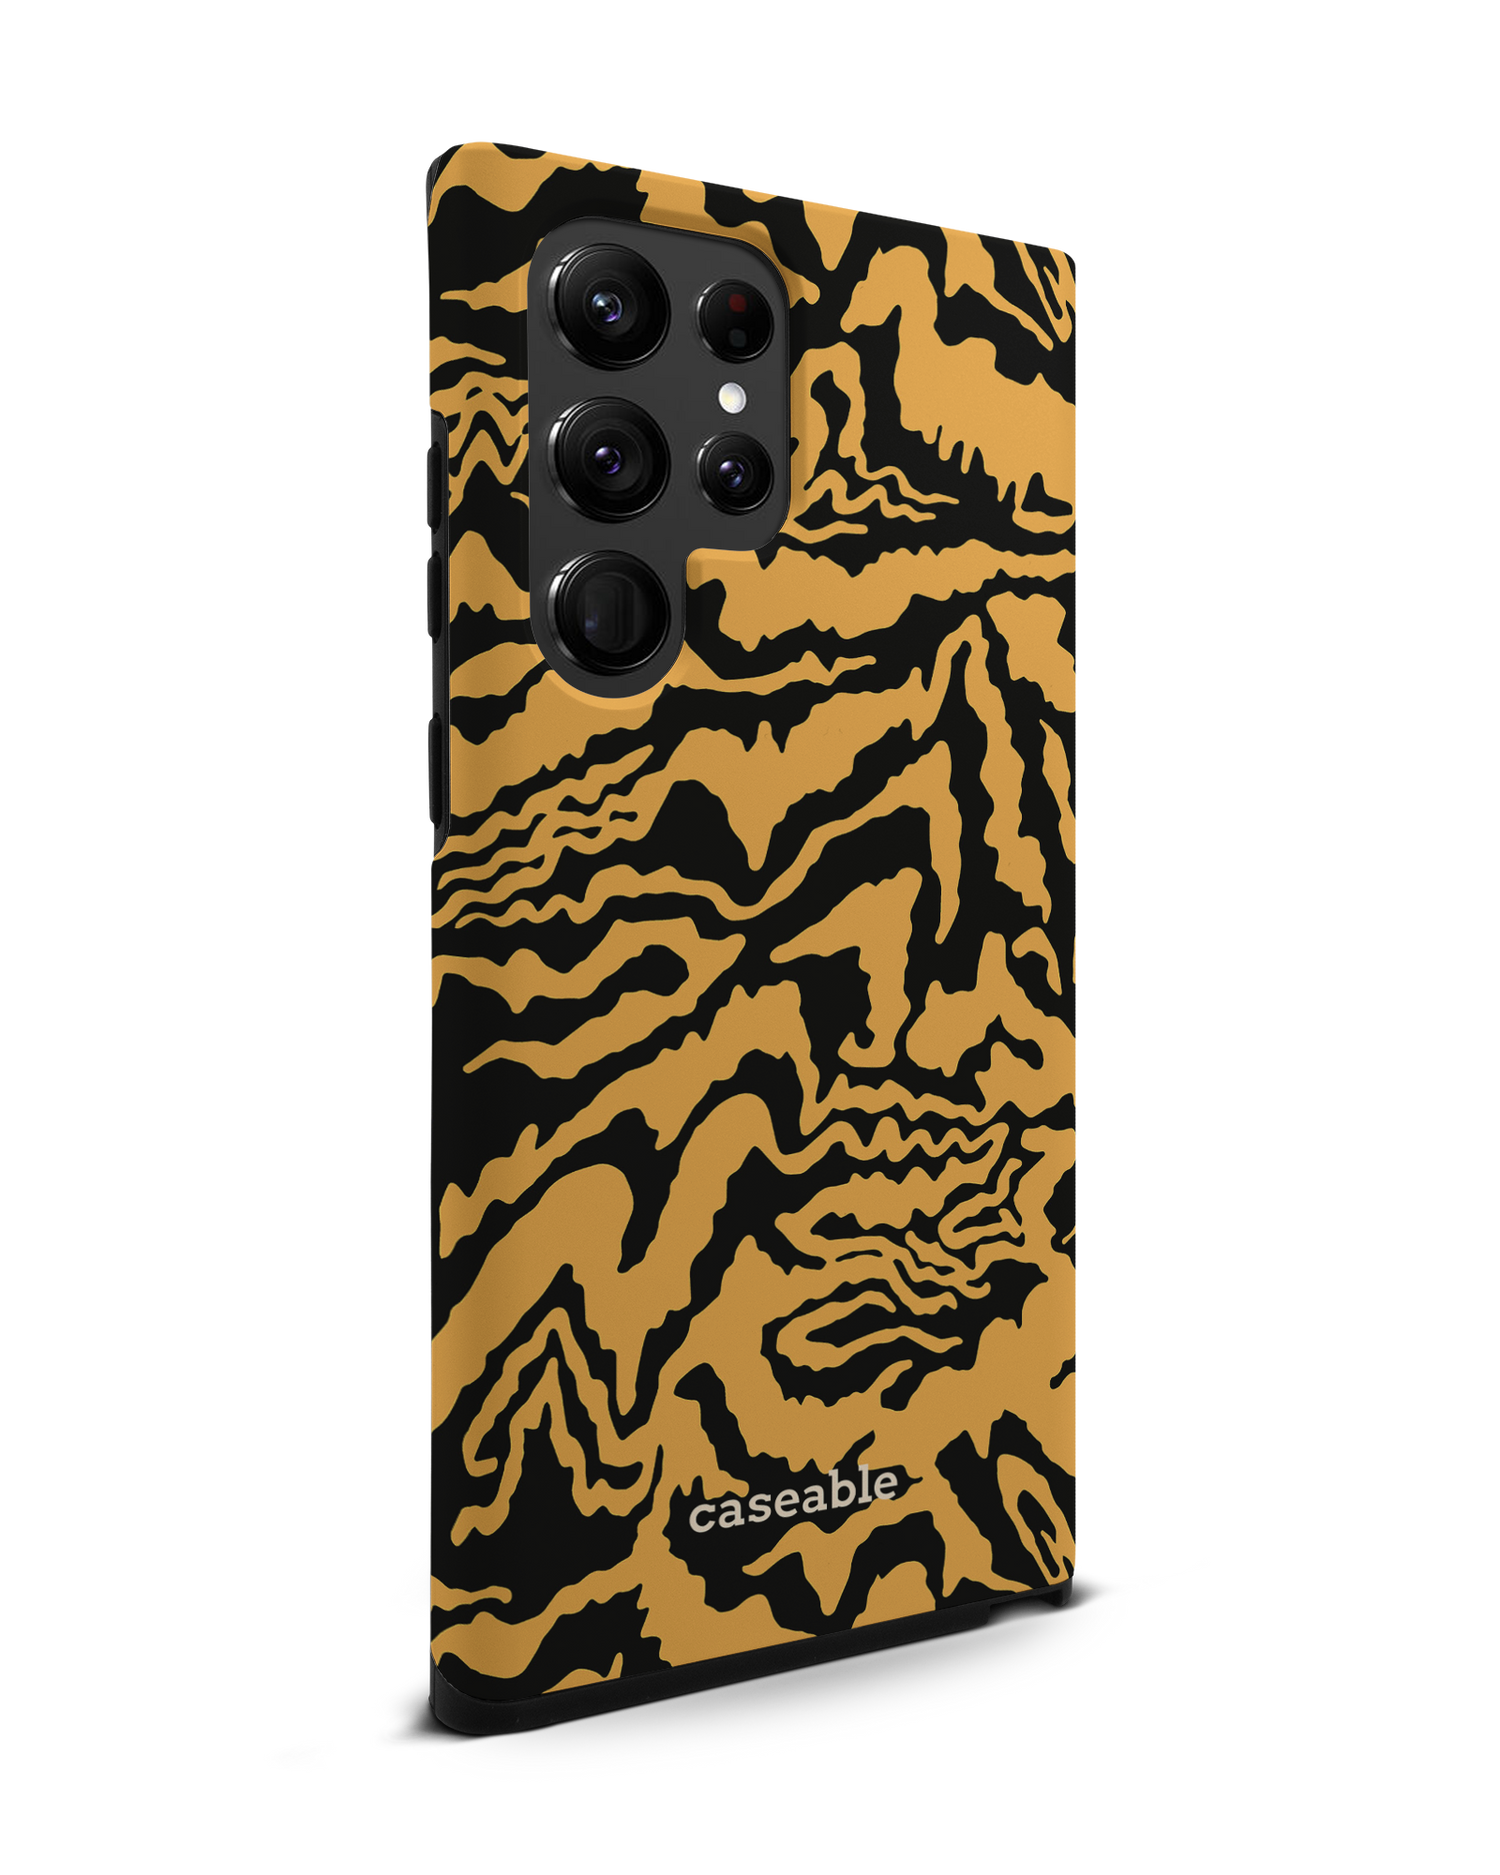 Warped Tiger Stripes Premium Phone Case Samsung Galaxy S22 Ultra 5G: View from the left side